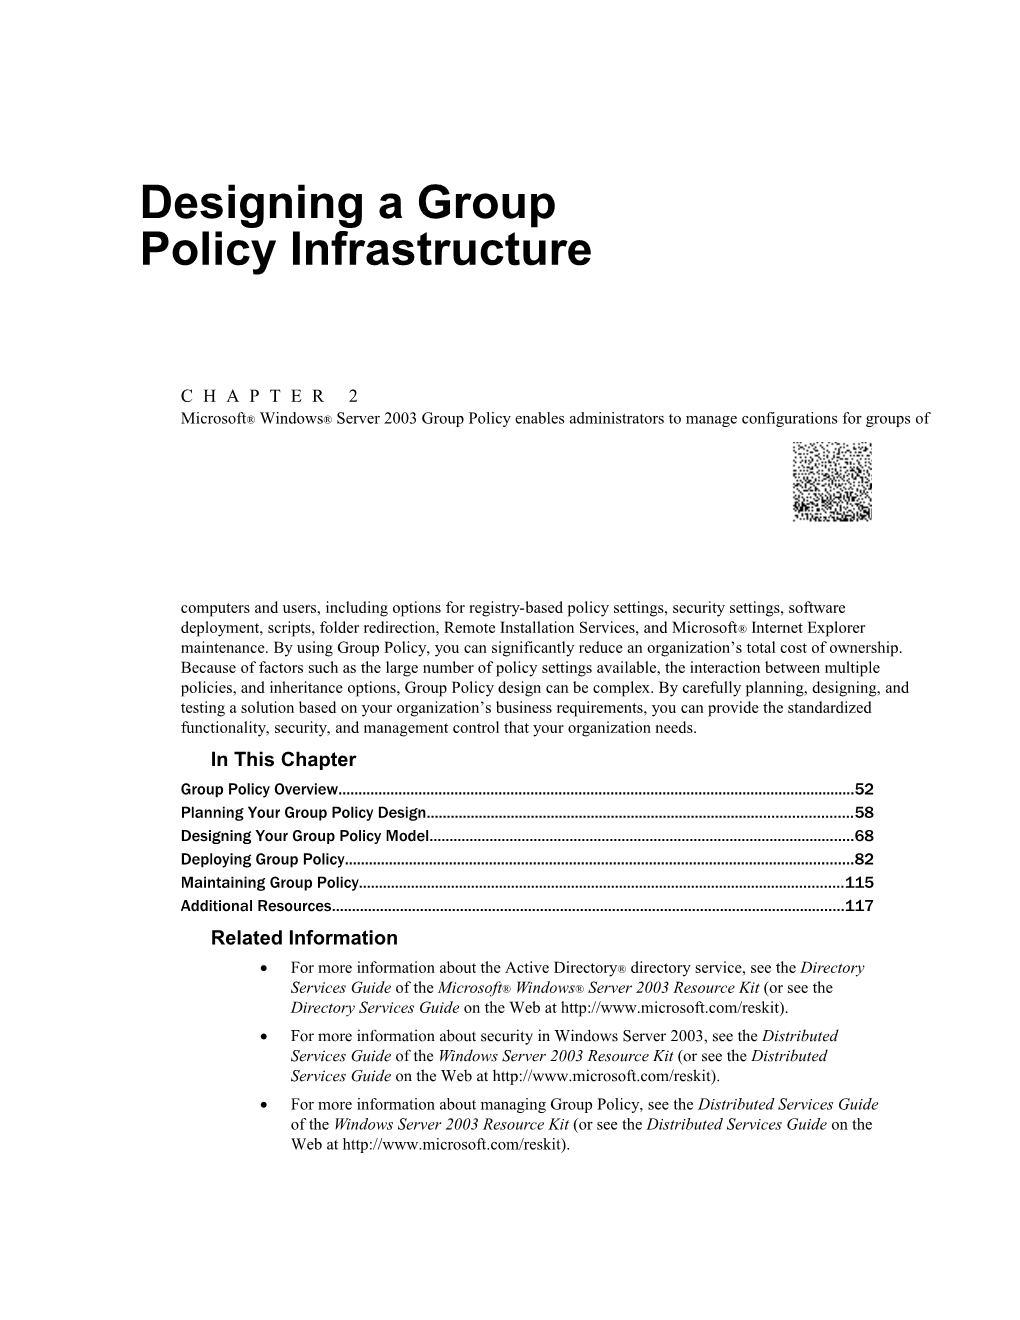 04 CHAPTER 2 Designing a Group Policy Infrastructure